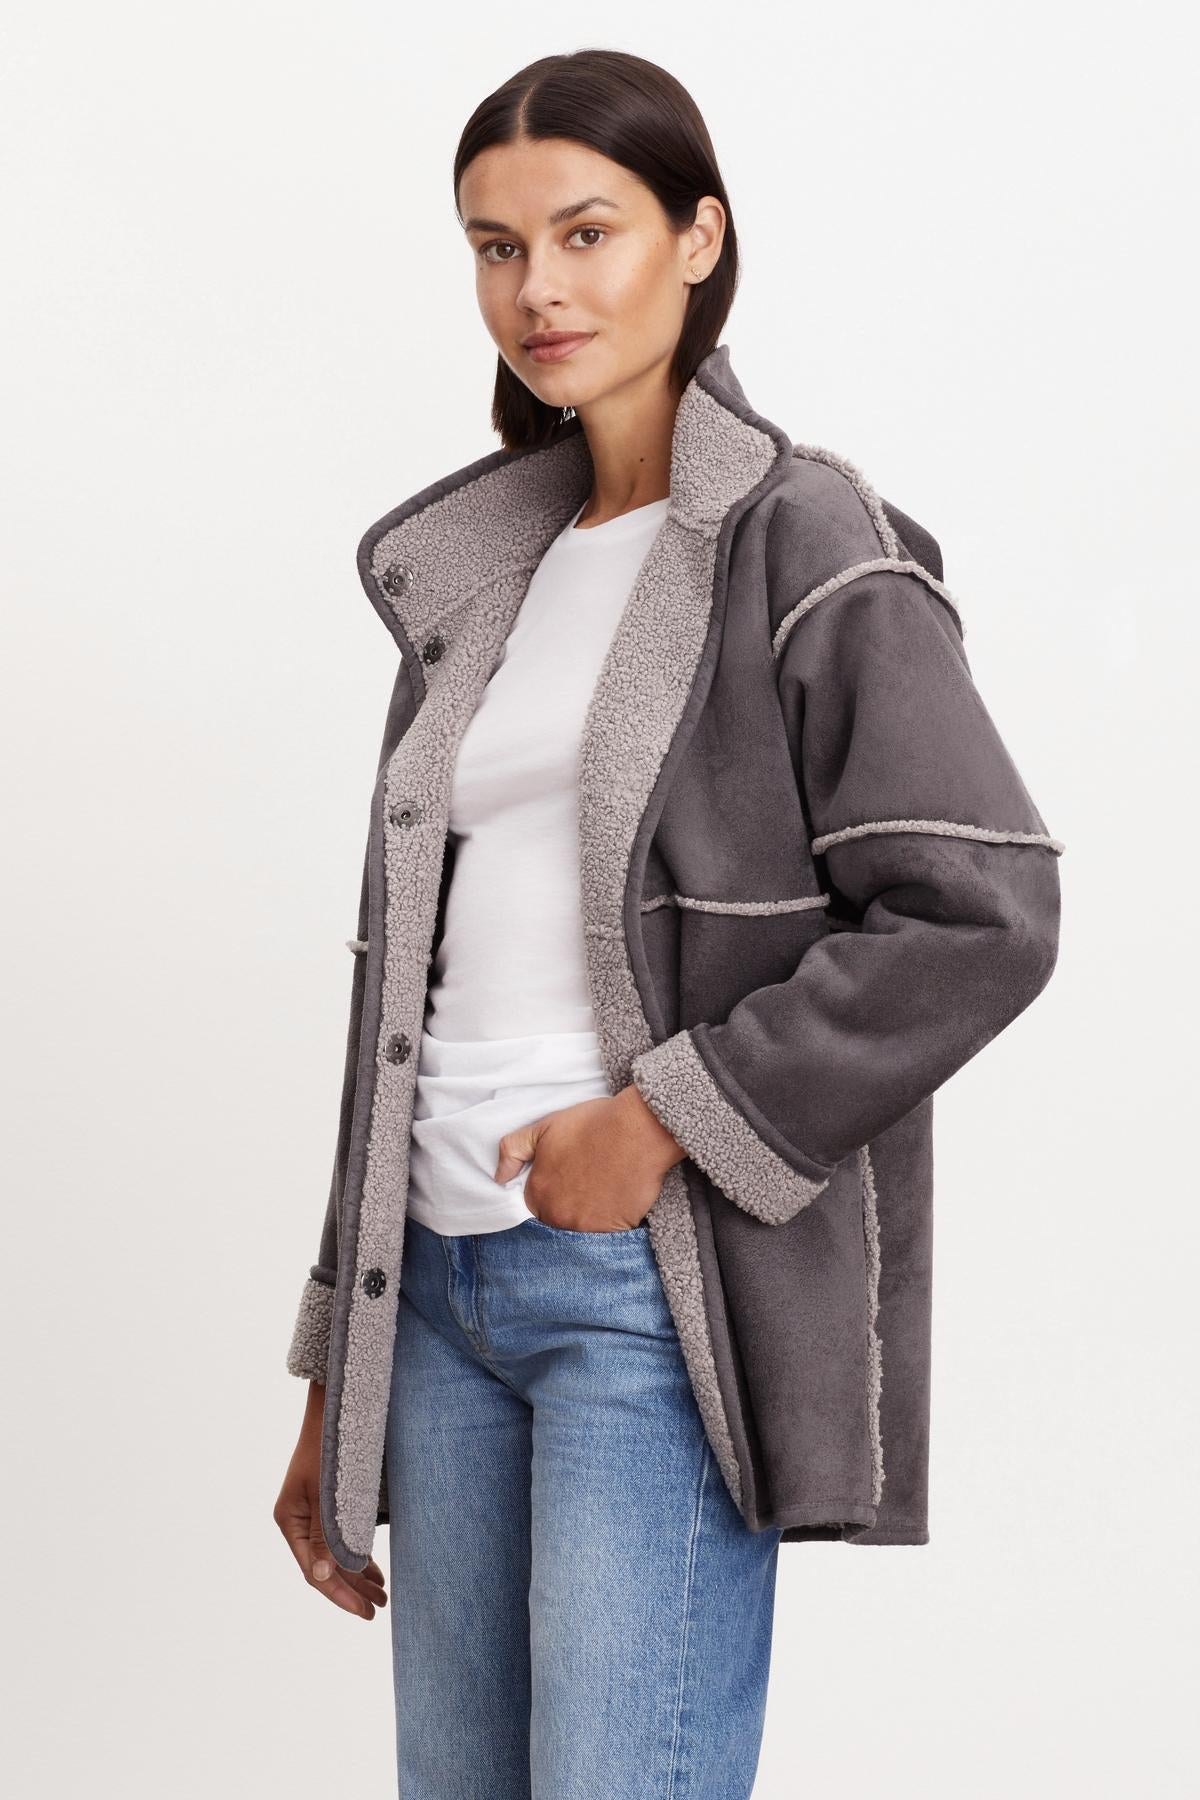 A person stands wearing a Velvet by Graham & Spencer ALBANY LUX SHERPA REVERSIBLE JACKET over a white shirt and blue jeans, with one hand in their pocket. They have dark hair and are looking directly at the camera.-36094291083457